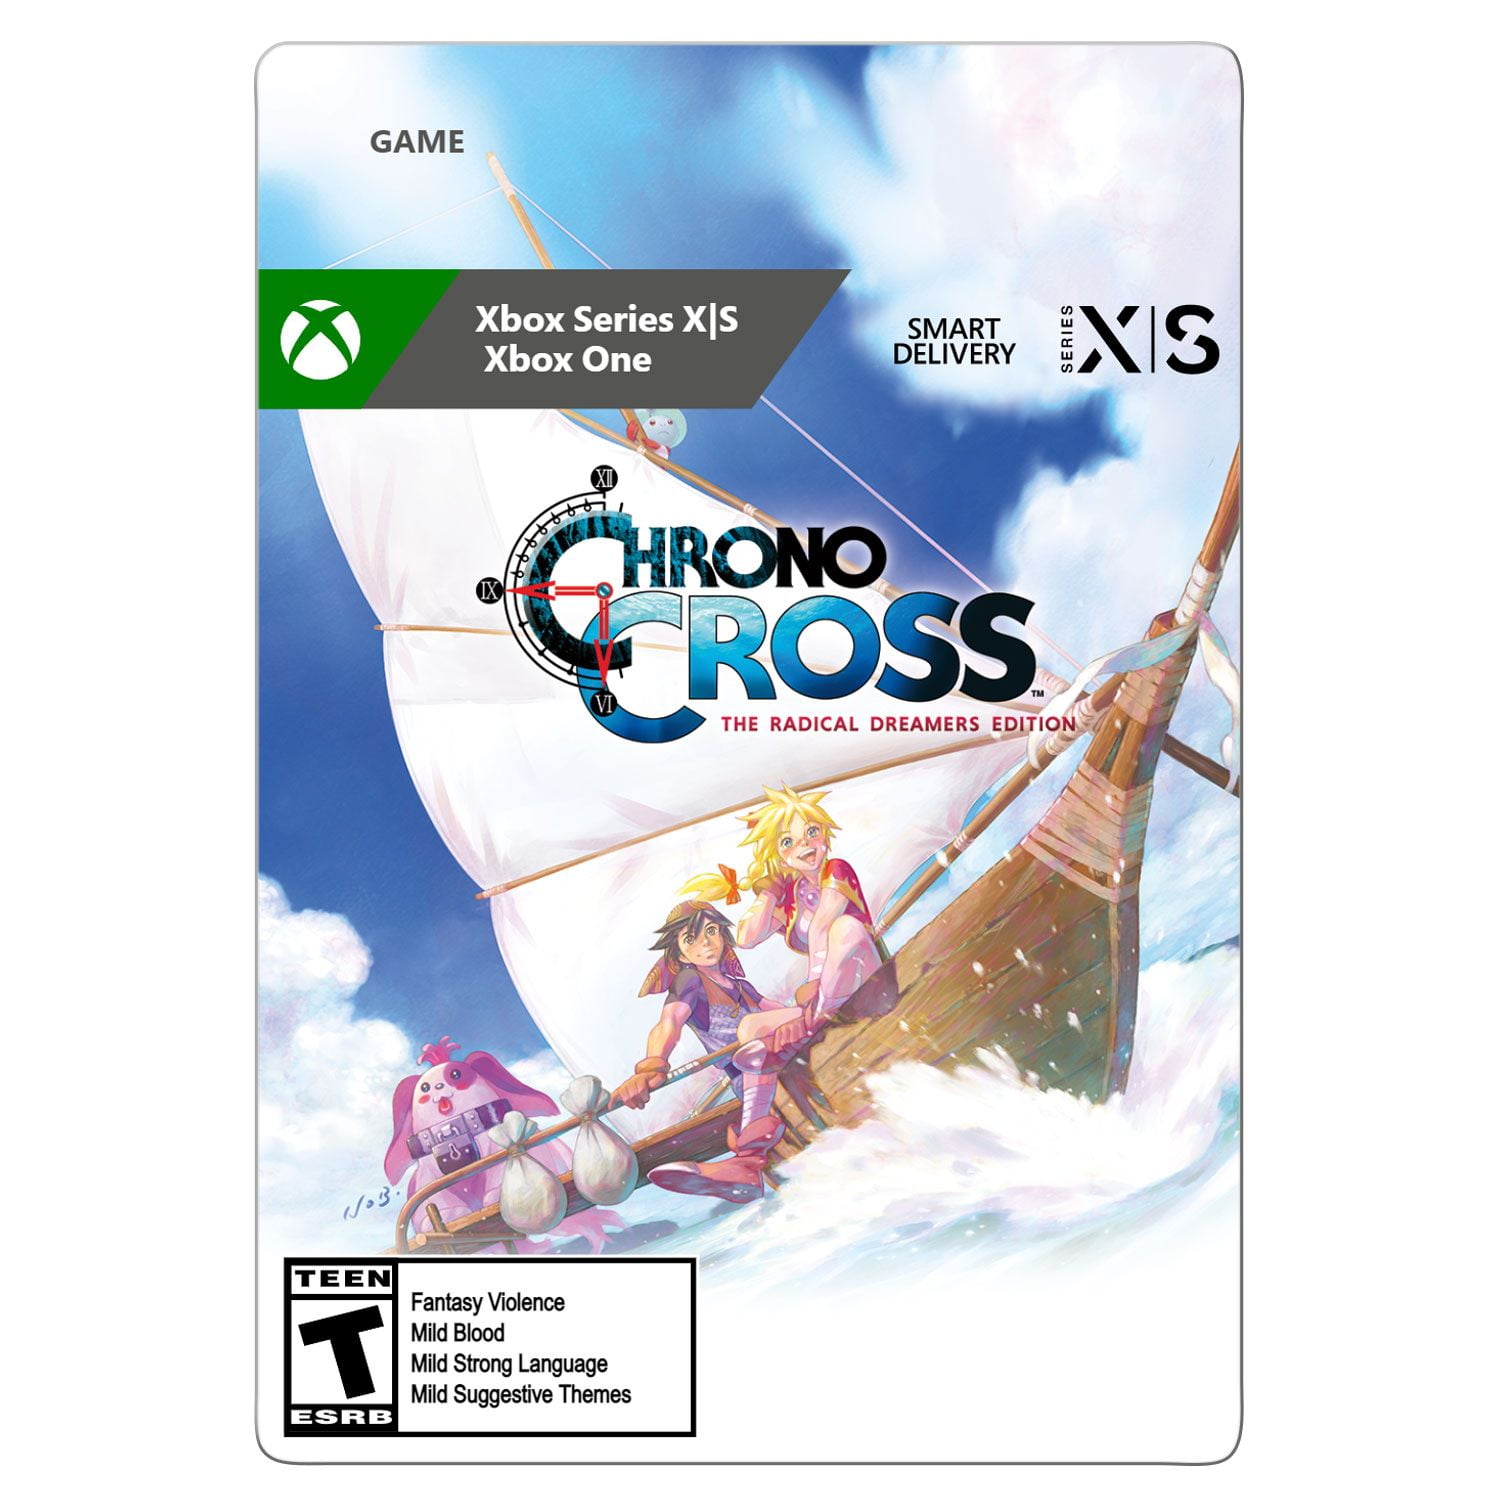 CHRONO CROSS: THE RADICAL DREAMERS EDITION Nintendo Switch Physical Copy  English